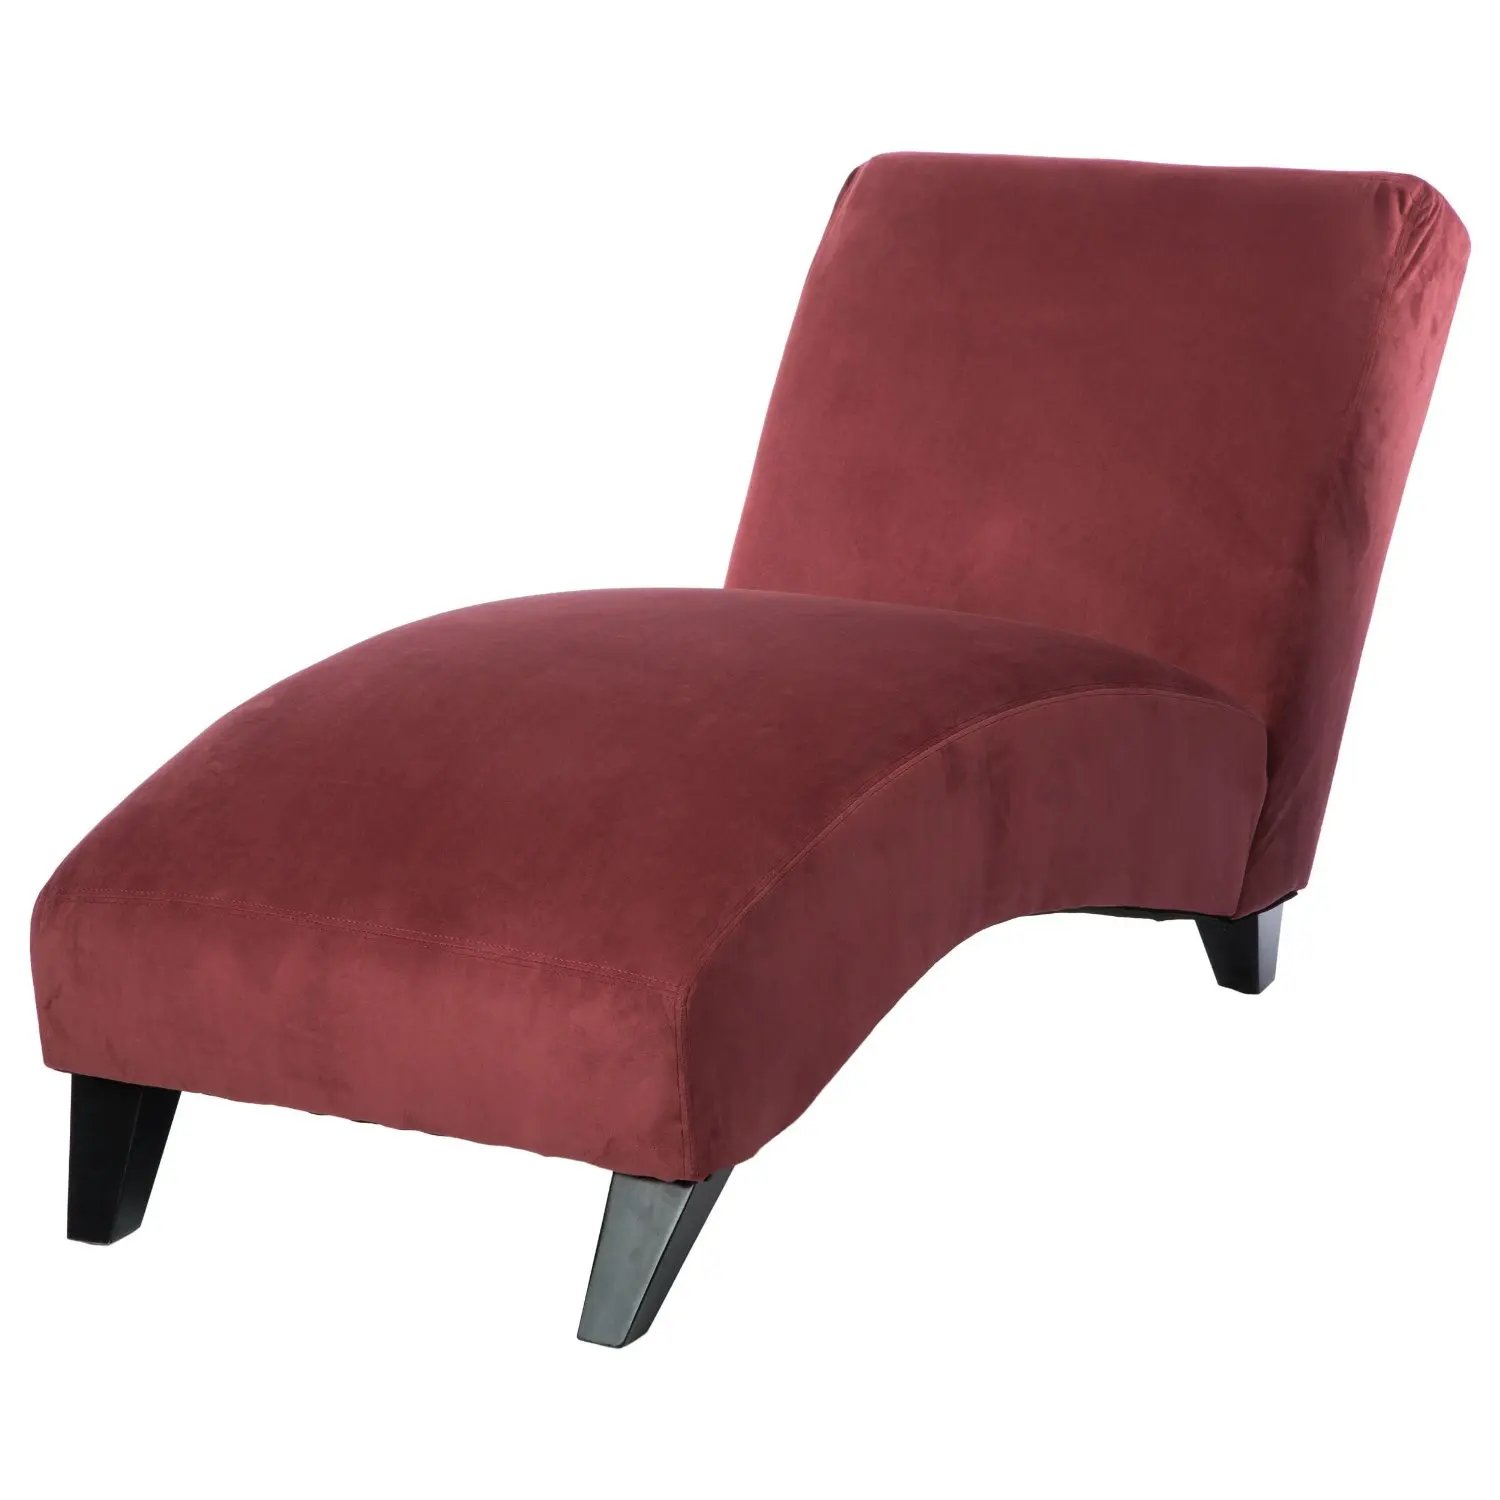 Buy Chaise Lounge Chair Displays A Curved Back Armless Design A Modern Sofa Sleeper Made From Red Polyester Fabric This Loveseat Is Great Accent Decor For Any Living Room Bedroom Guest